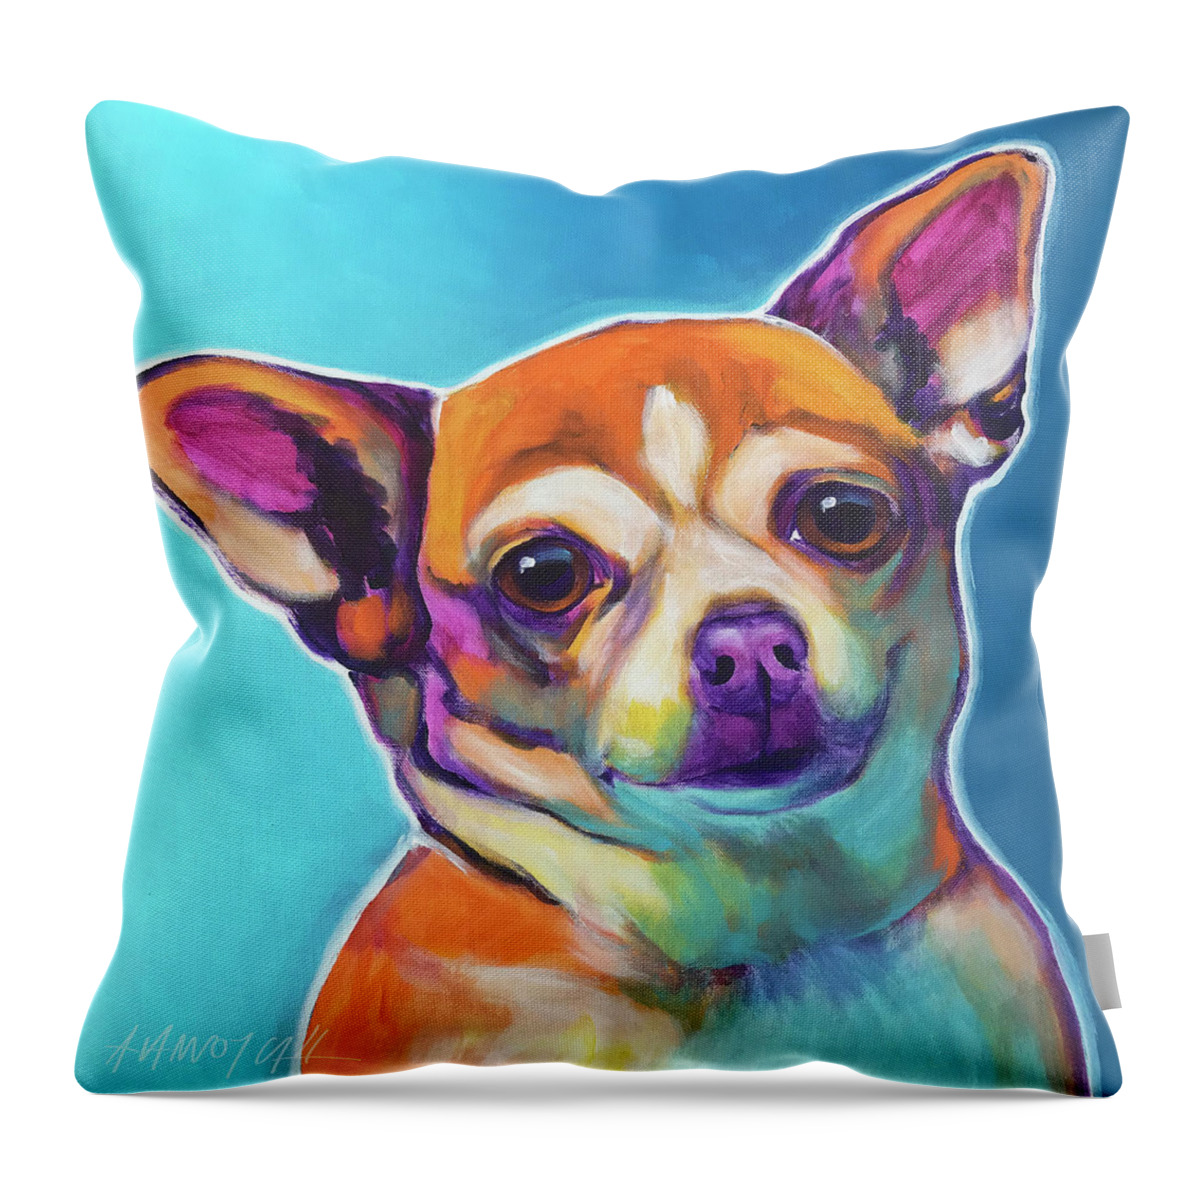 Chihuahua Throw Pillow featuring the painting Chihuahua - Starr by Dawg Painter